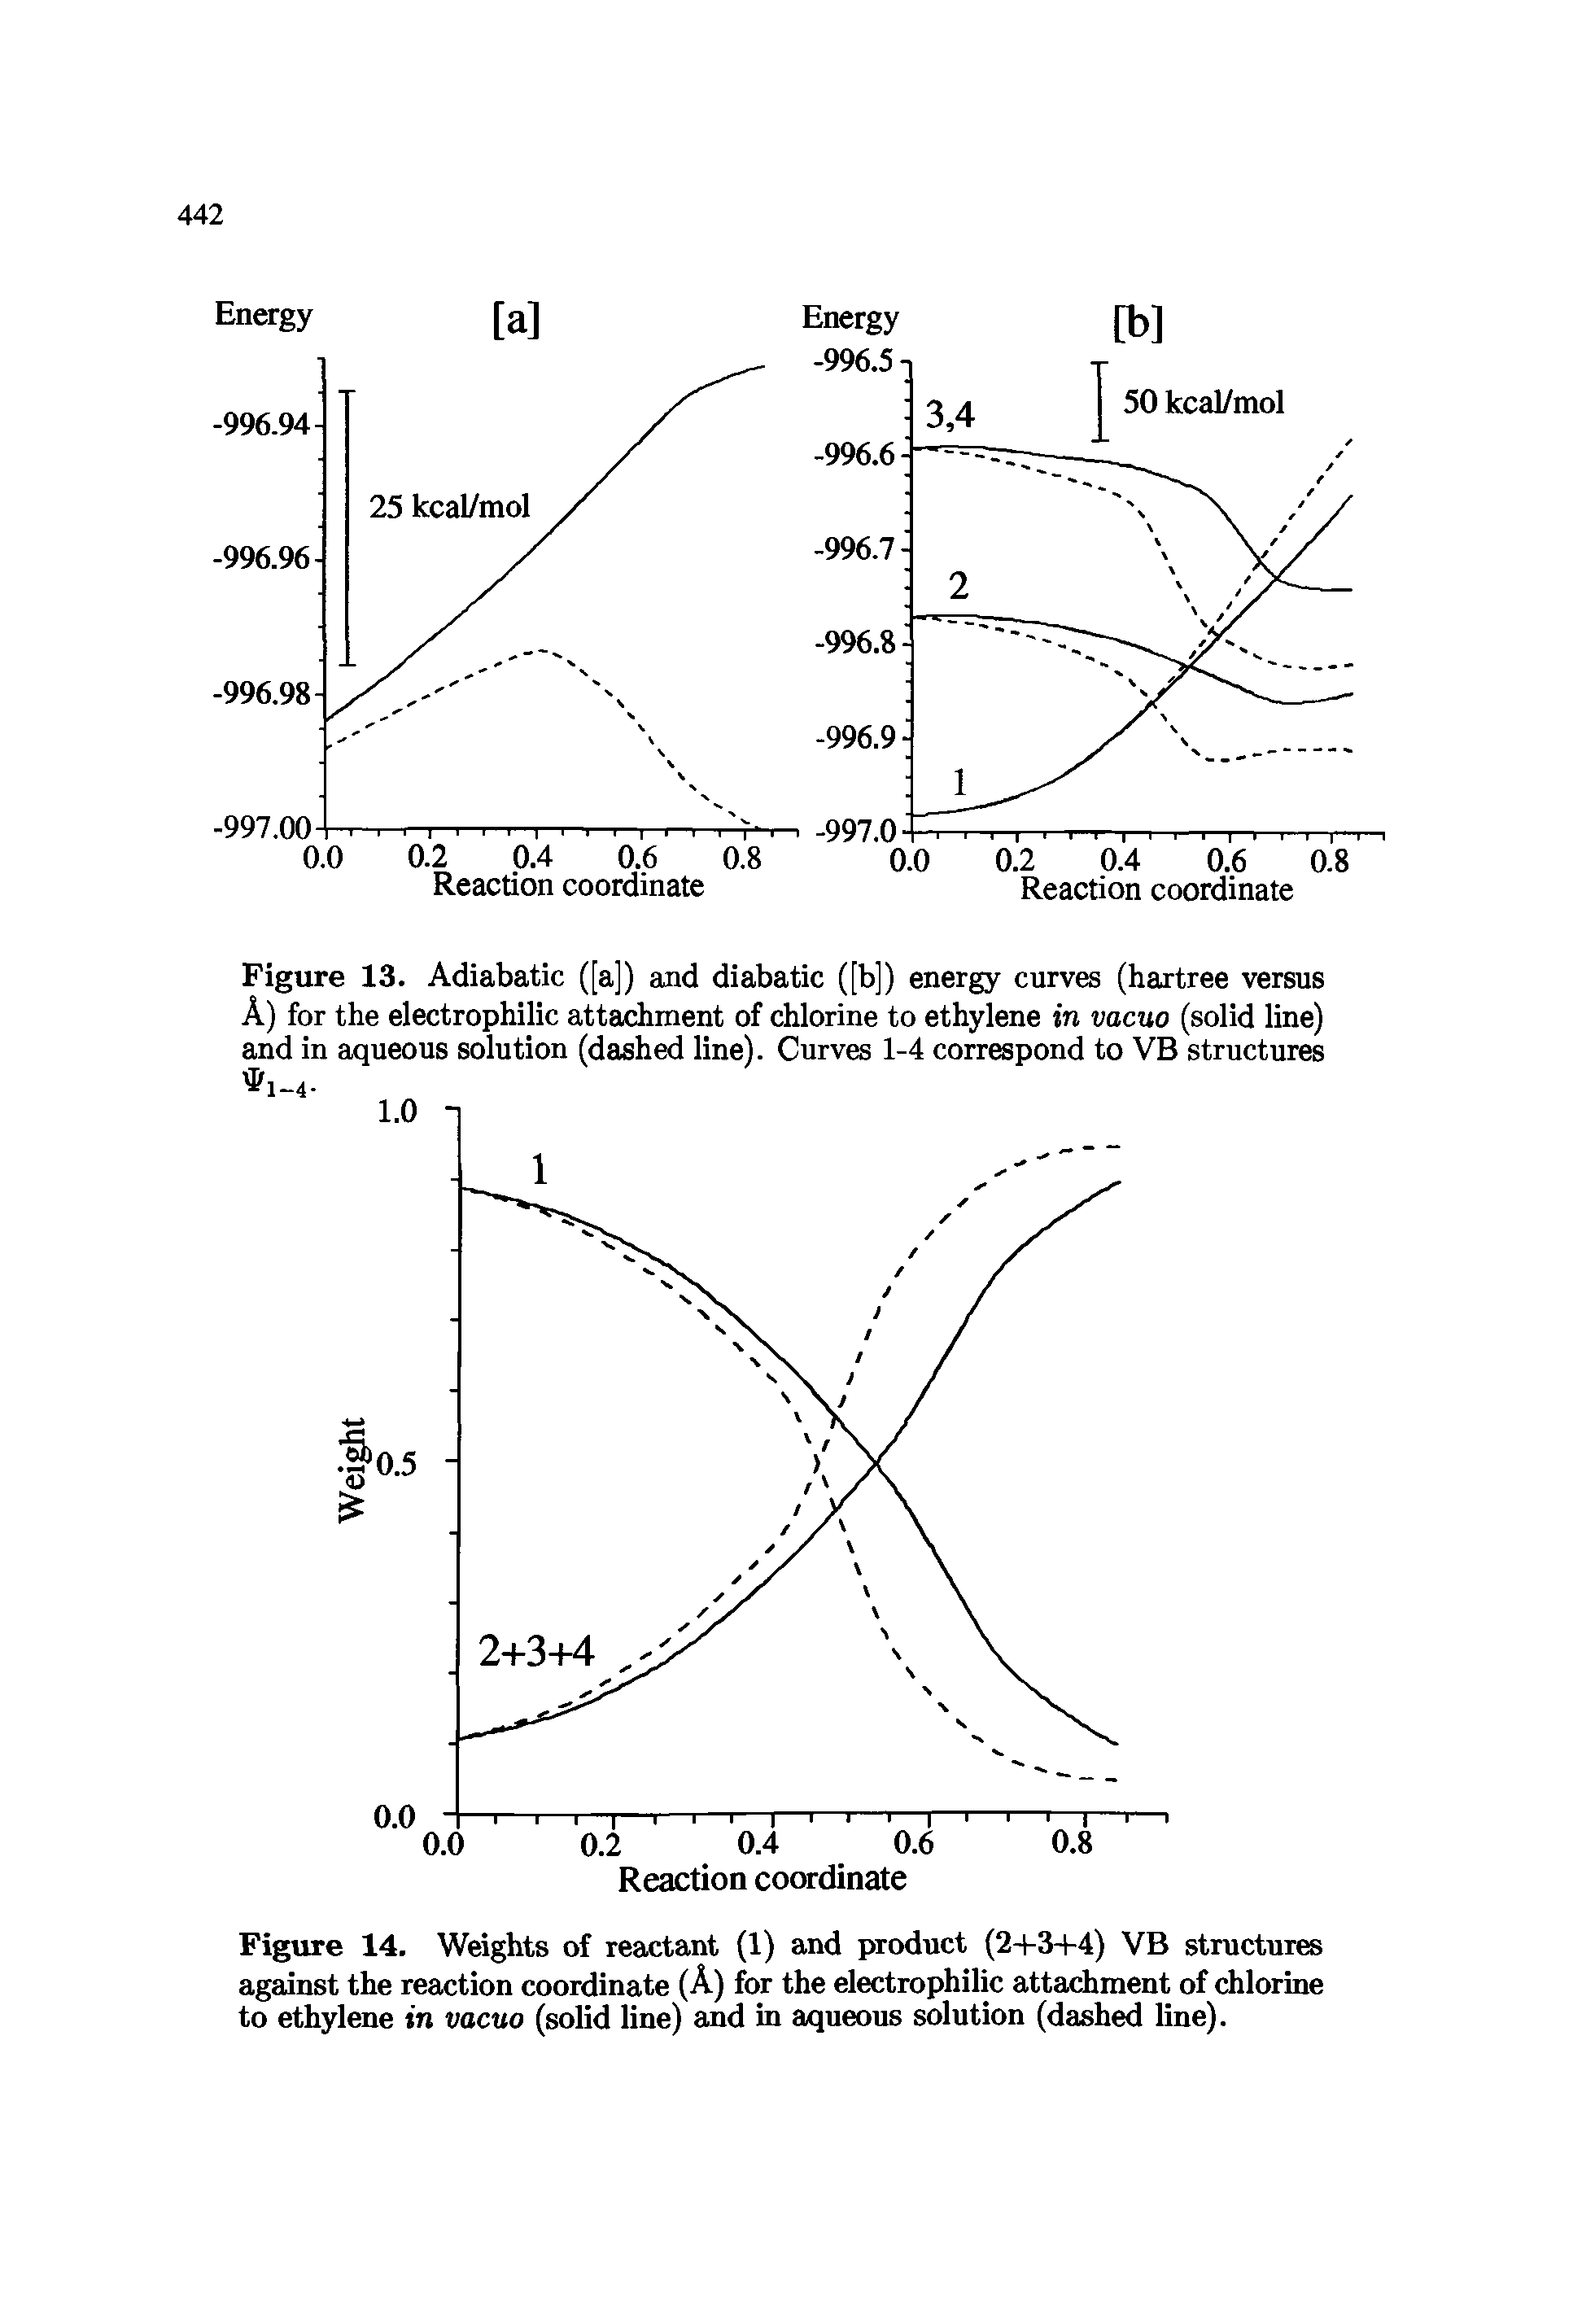 Figure 13. Adiabatic ([a]) and diabatic ([b]) energy curves (hartree versus A) for the electrophilic attachment of chlorine to ethylene in vacuo (solid line) and in aqueous solution (dashed line). Curves 1-4 correspond to VB structures...